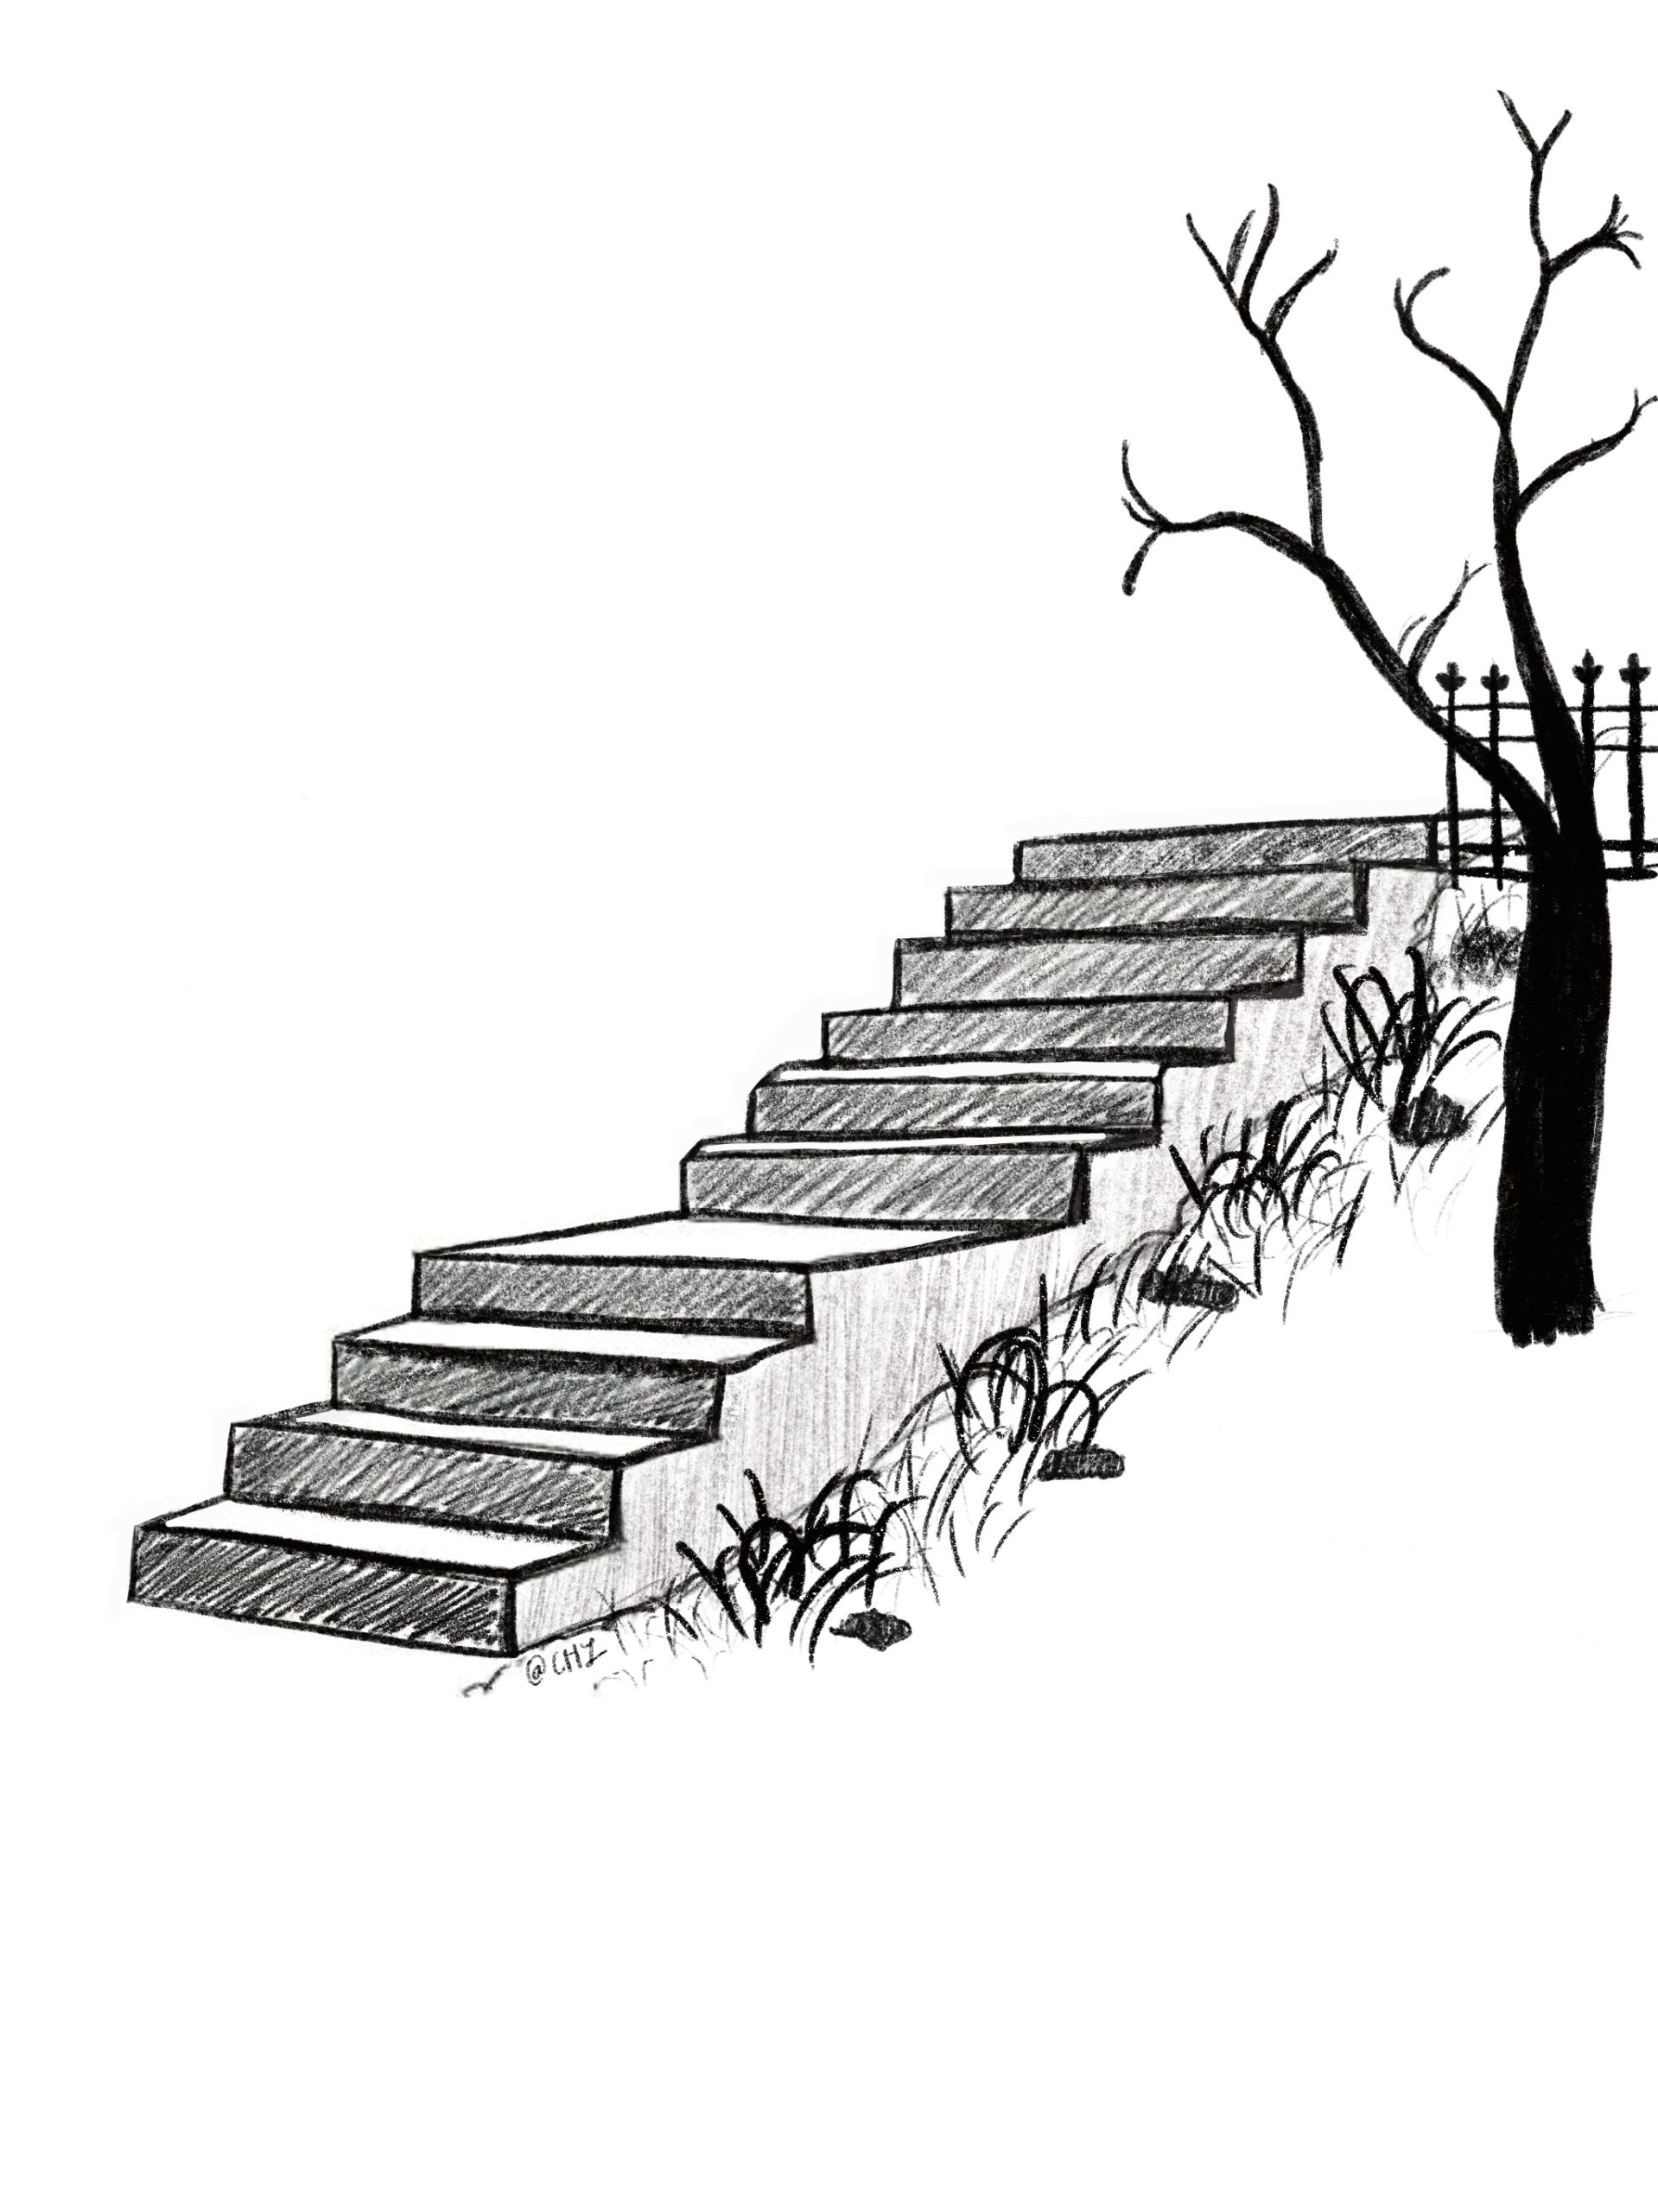 The author’s artistic rendering of the stairs described as a physical barrier for her patient to access medical care.